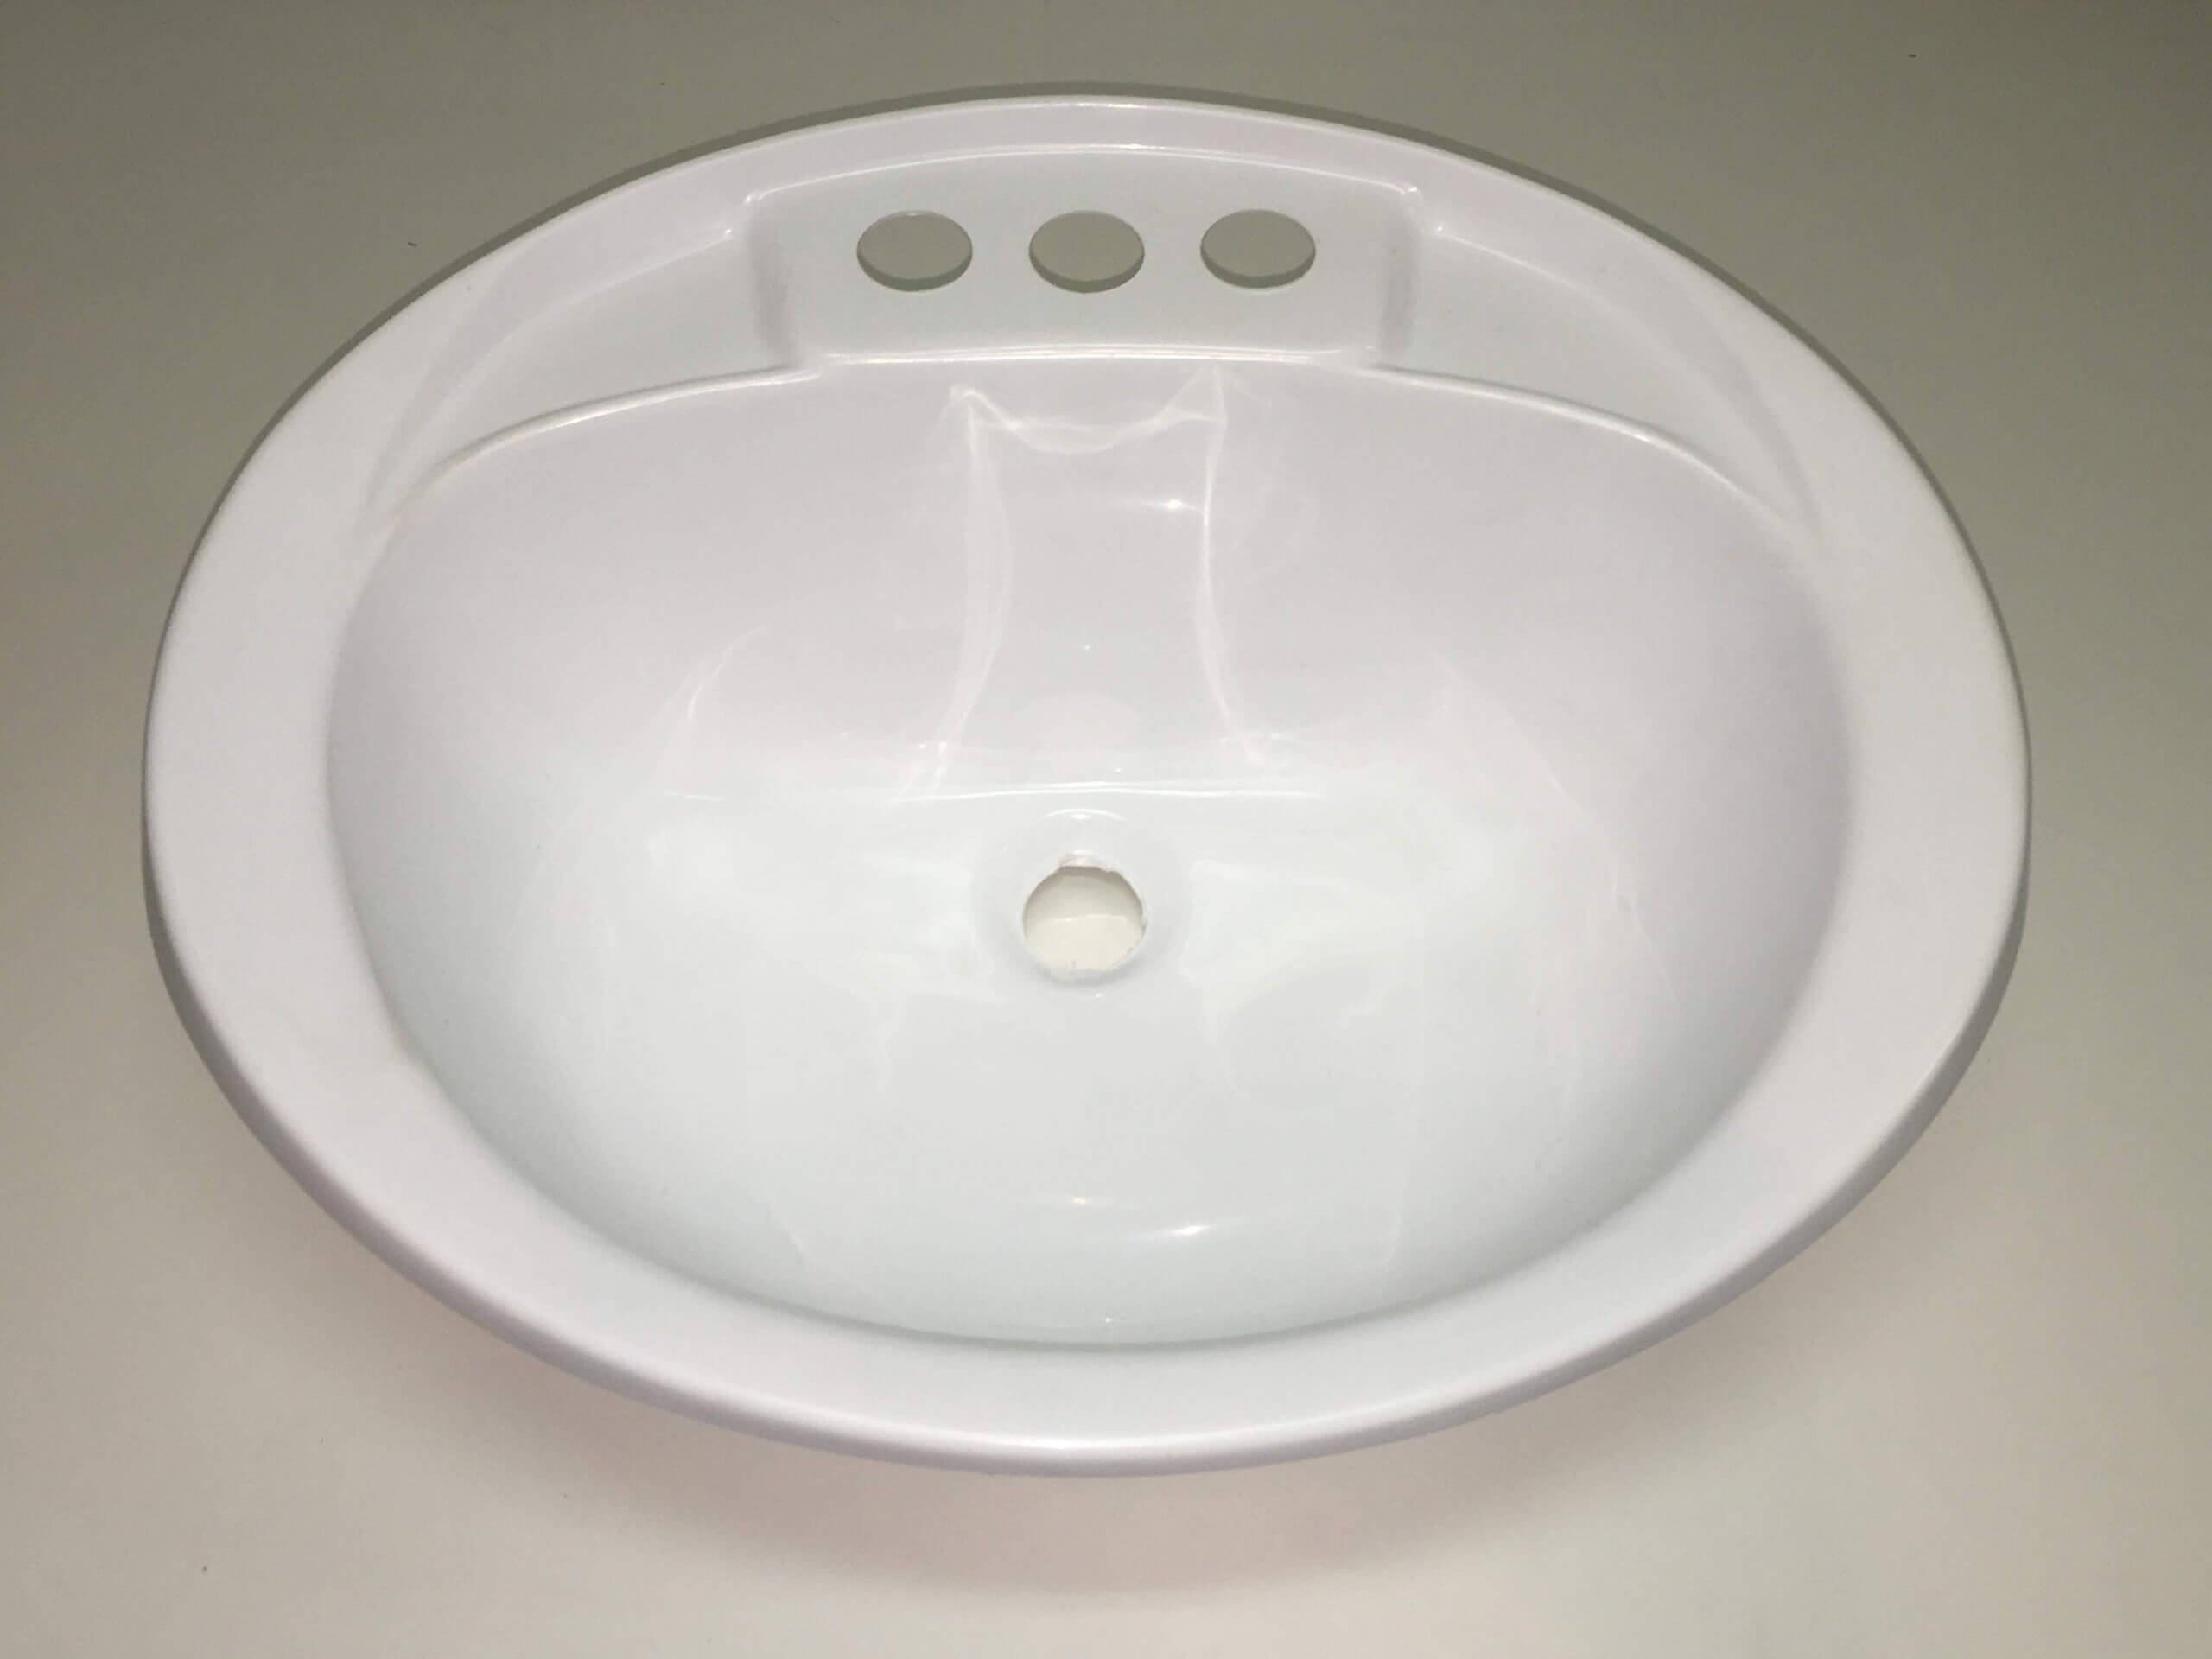 bathroom oval sink 33 inches by 18 inches